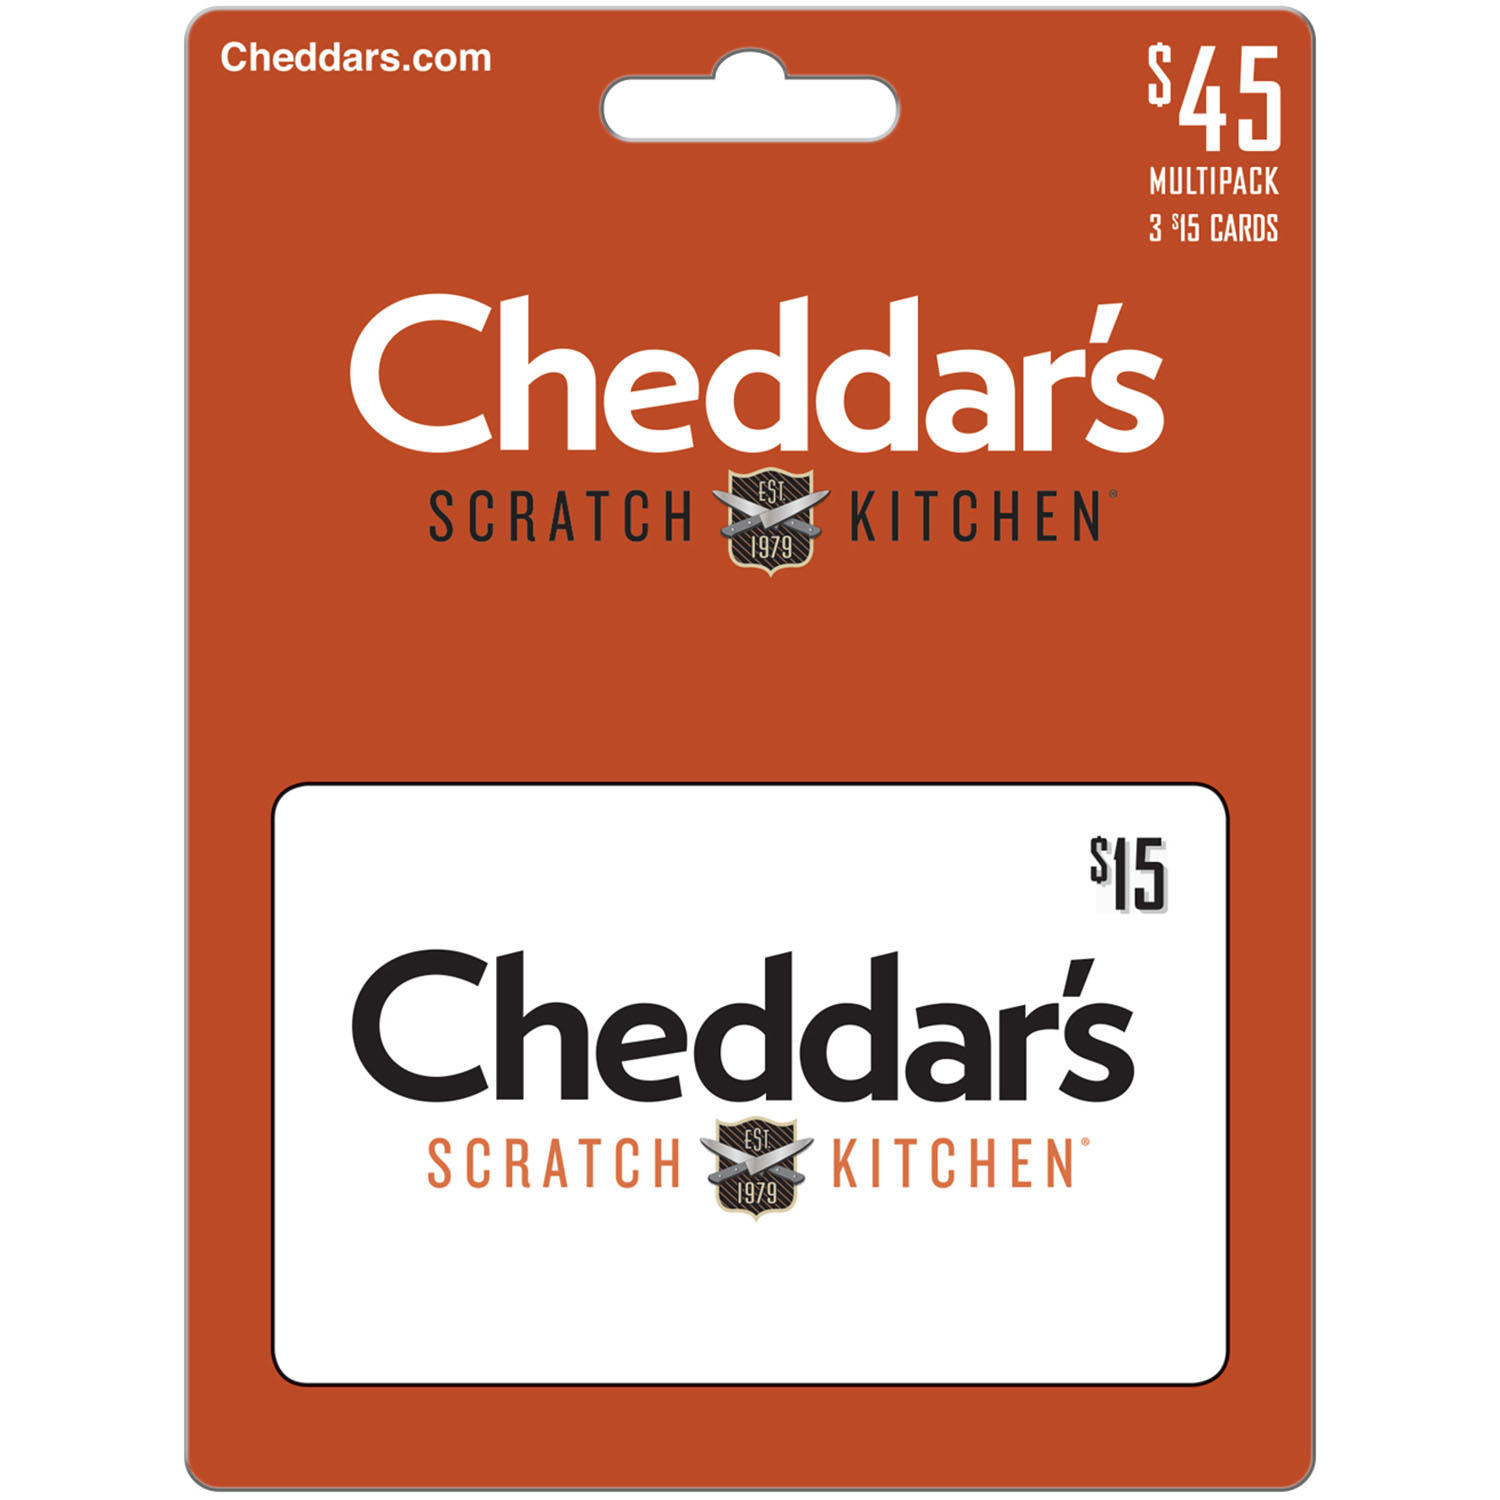 Cheddar's $45 Gift Card Multi-Pack, 3 x $15